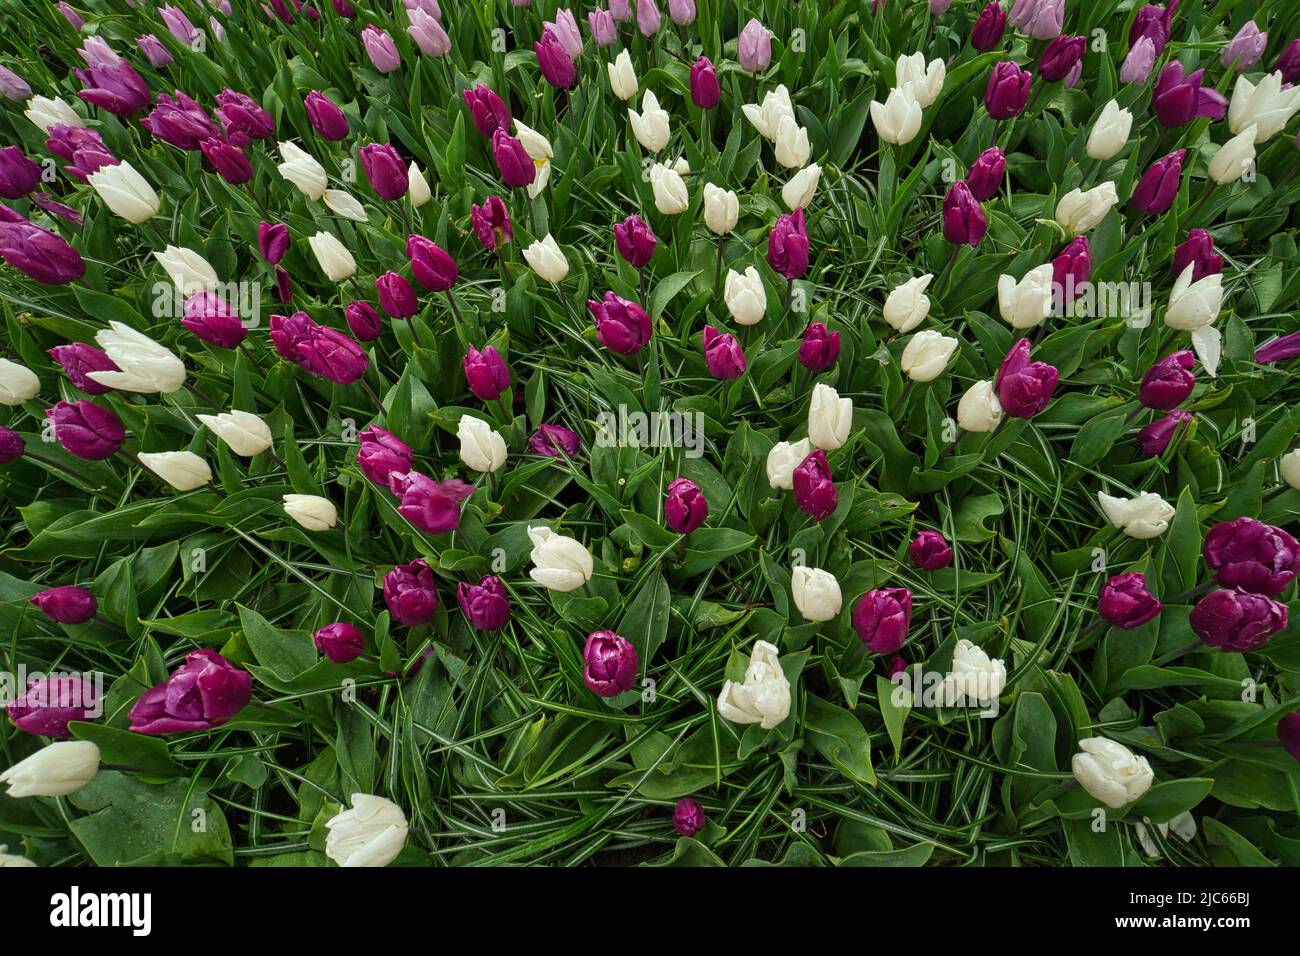 Flower field with many tulips in white and purple just before flowering Stock Photo